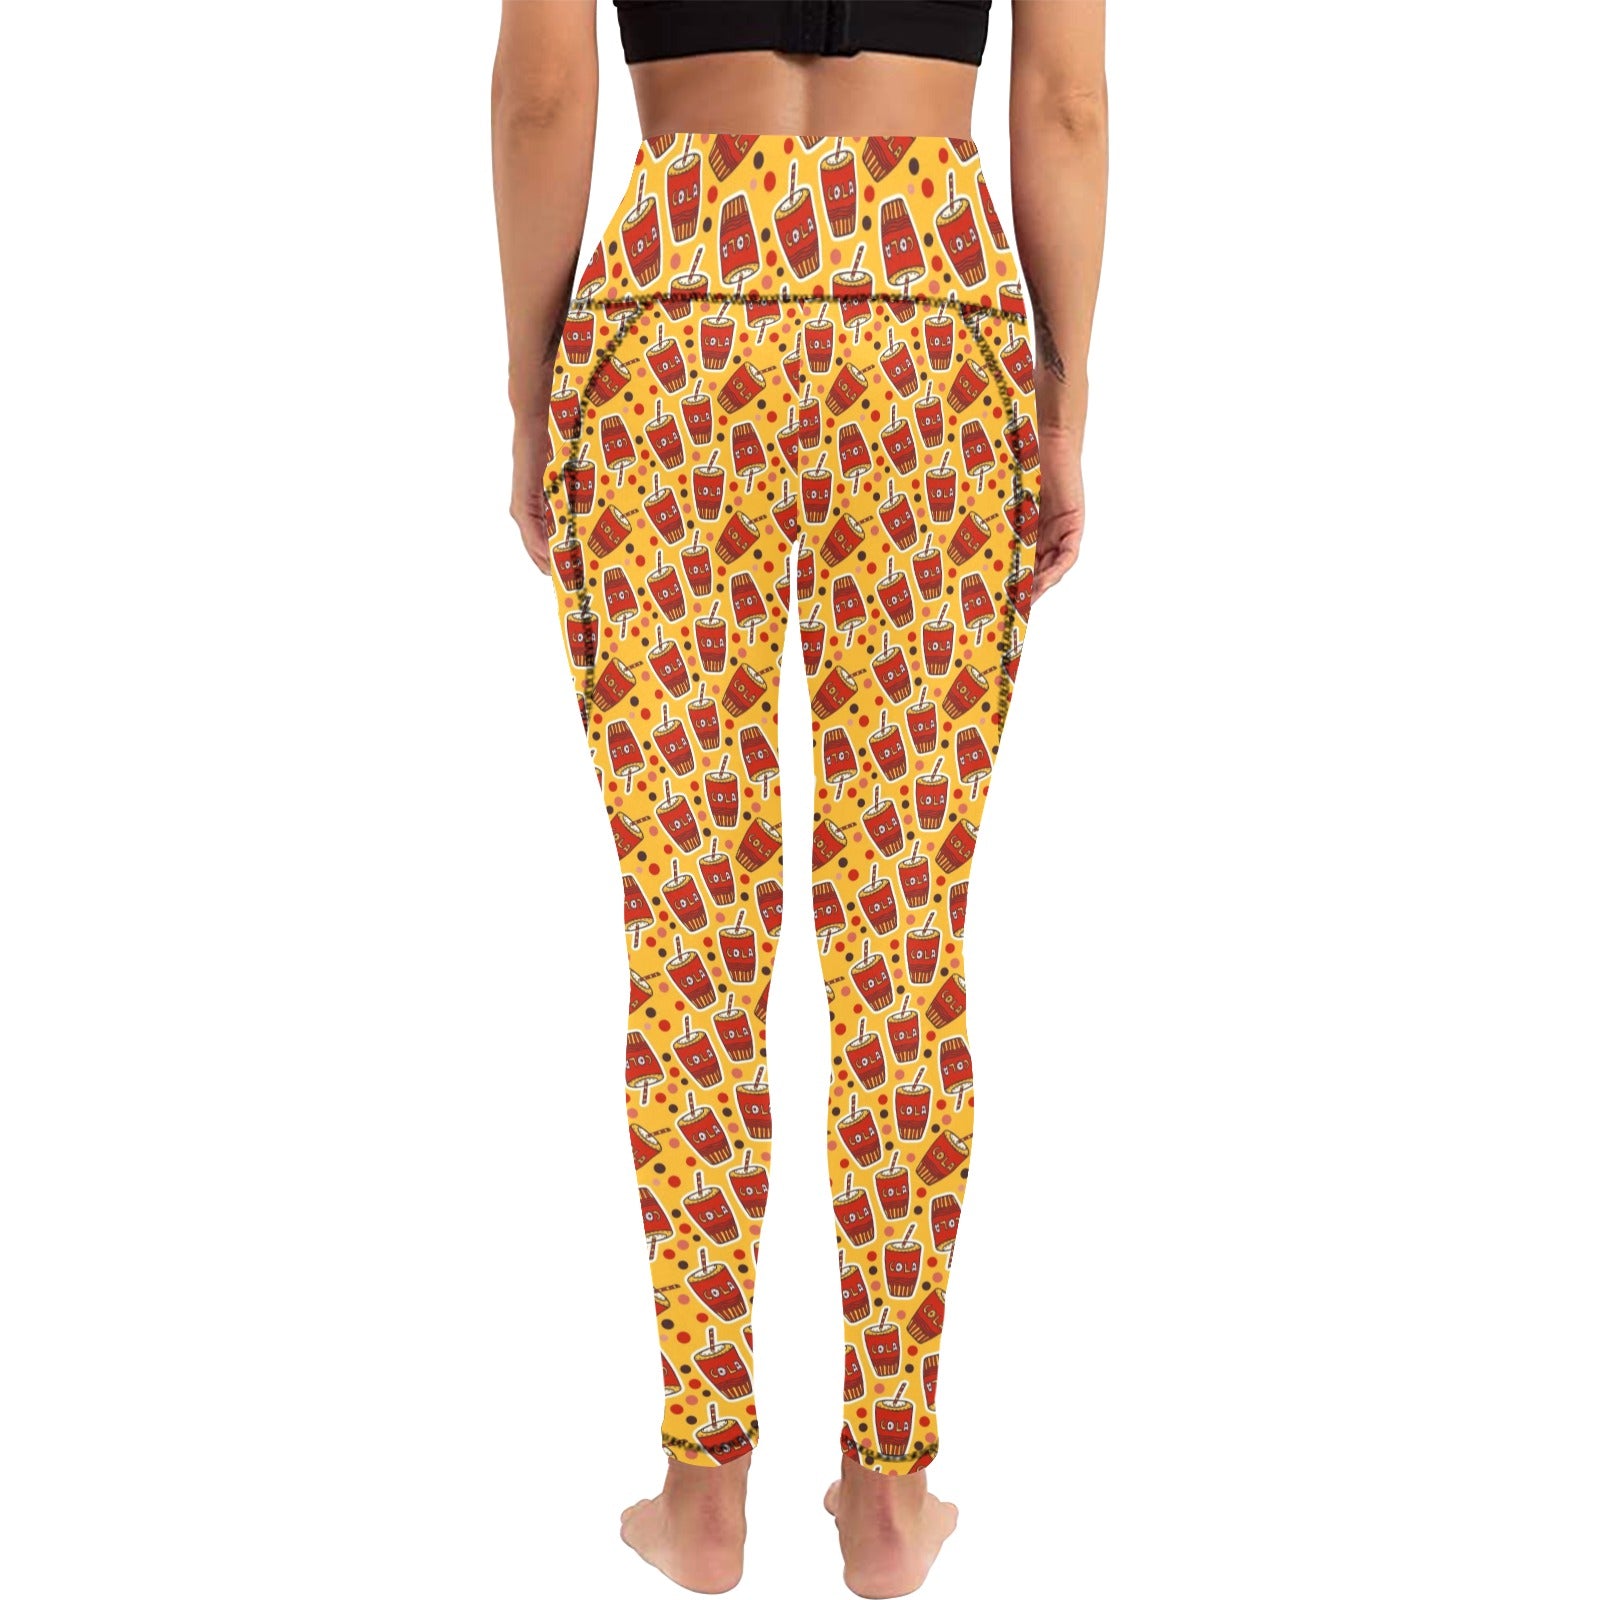 Cola - Women's Leggings with Pockets Women's Leggings with Pockets S - 2XL Food